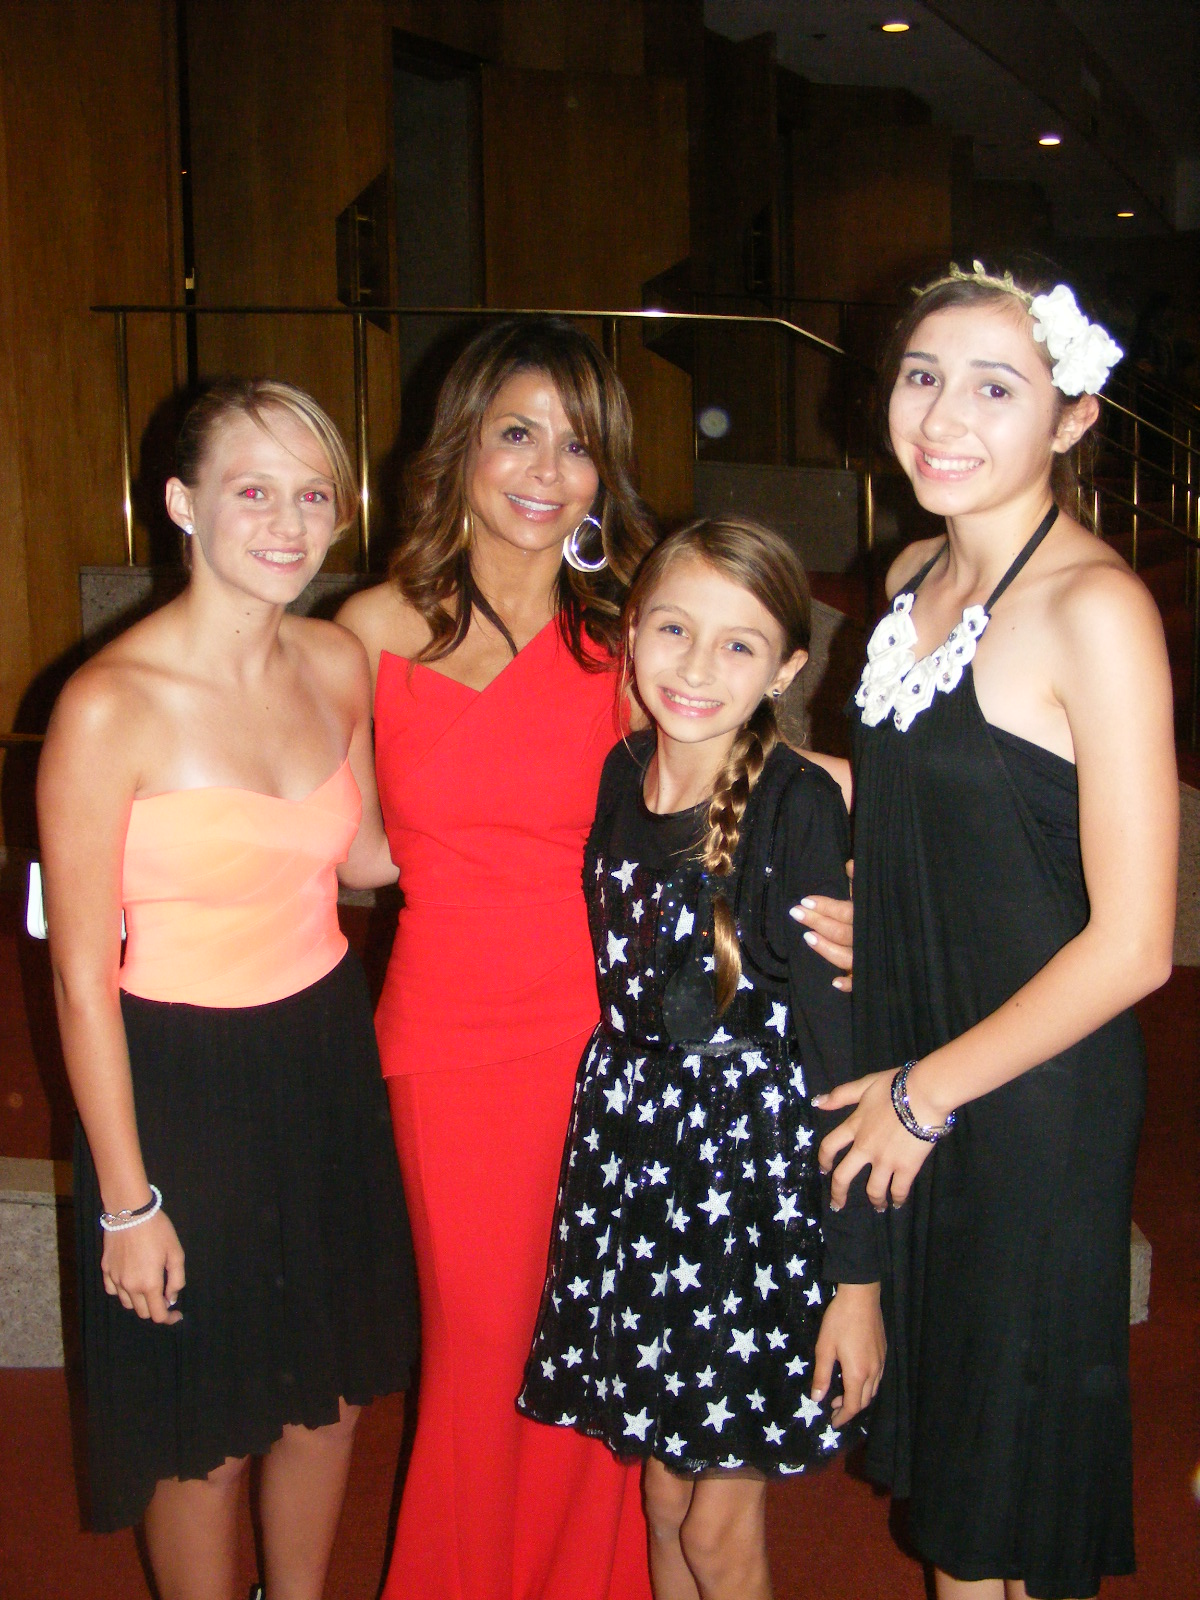 Paula Abdul and I at The Dizzy Feet Foundation's Celebration of Dance event.